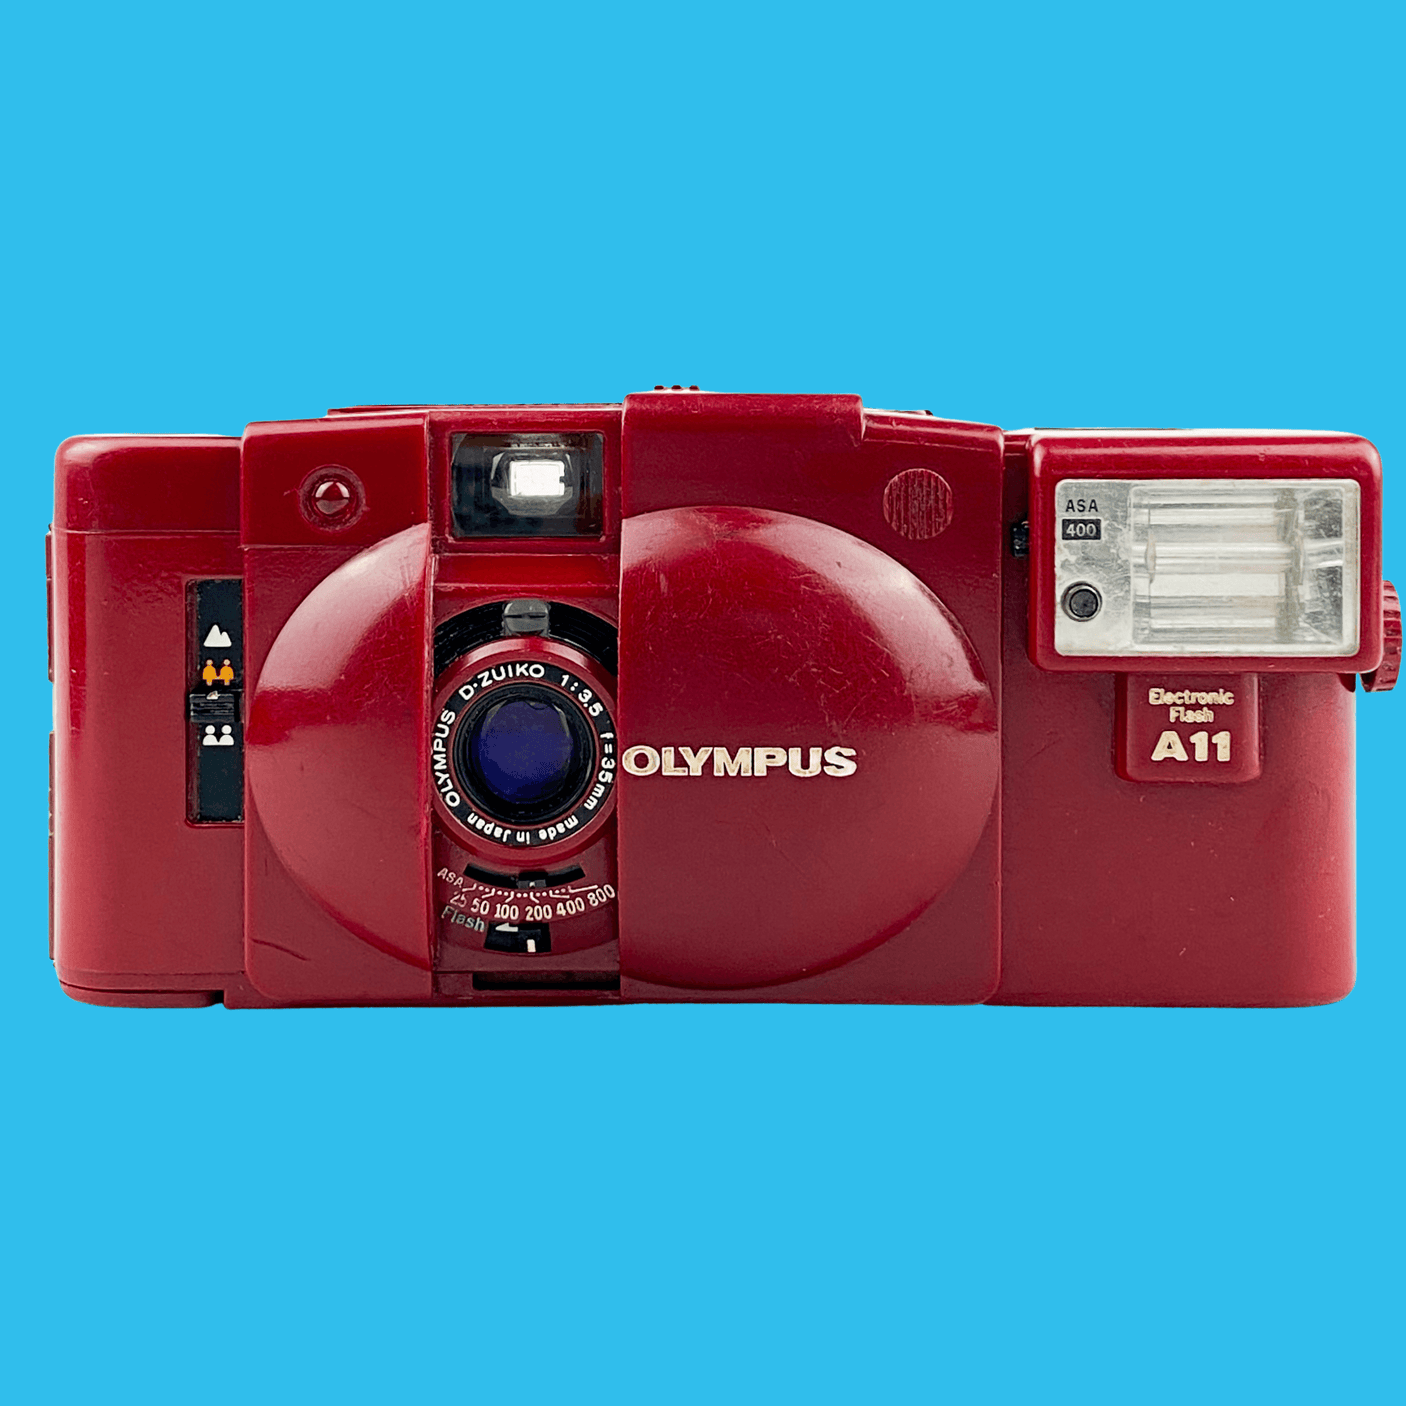 Red Olympus XA2 35mm Film Camera Point and Shoot w/ Olympus A11 Flash (Boxed)